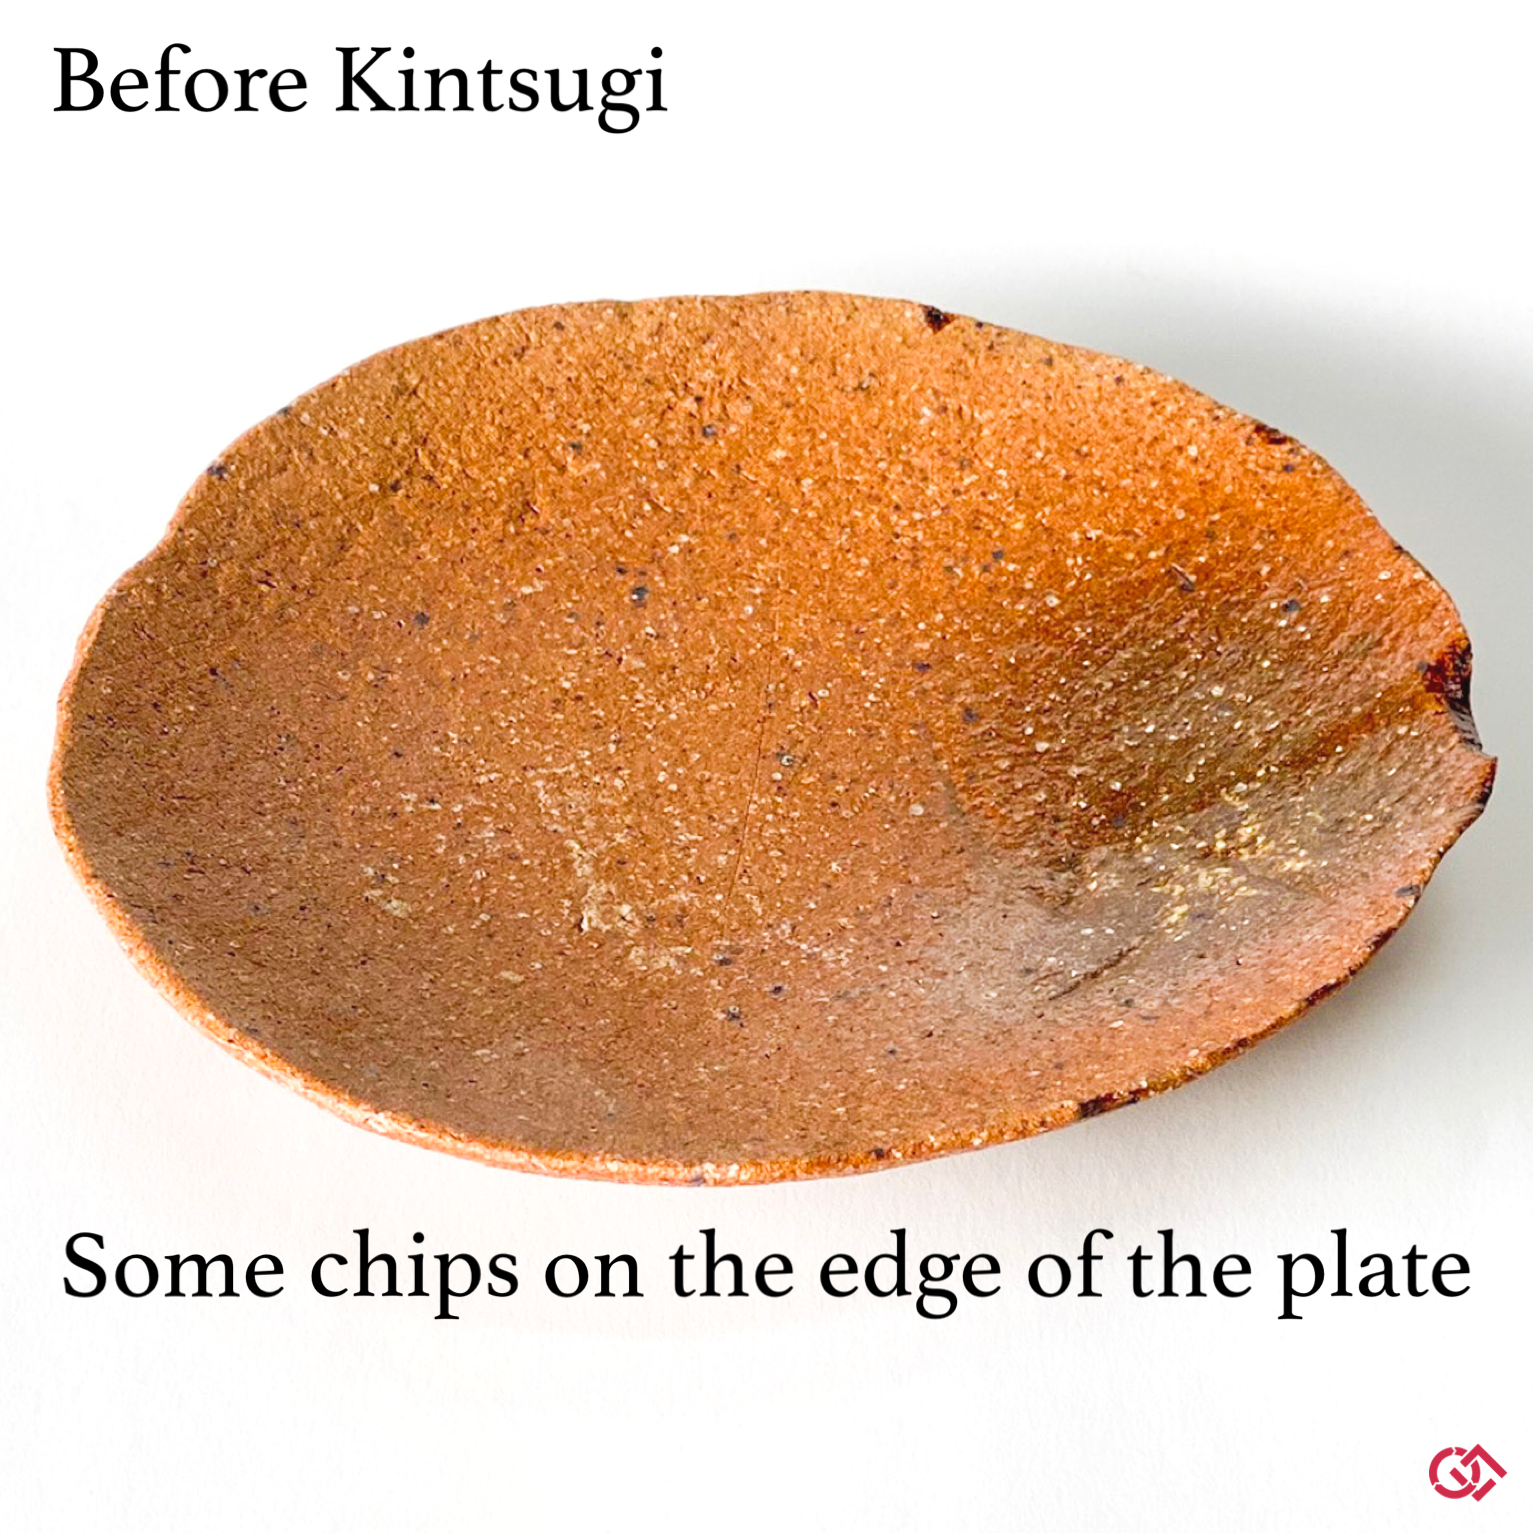 Chipped state of the plate before Kintsugi